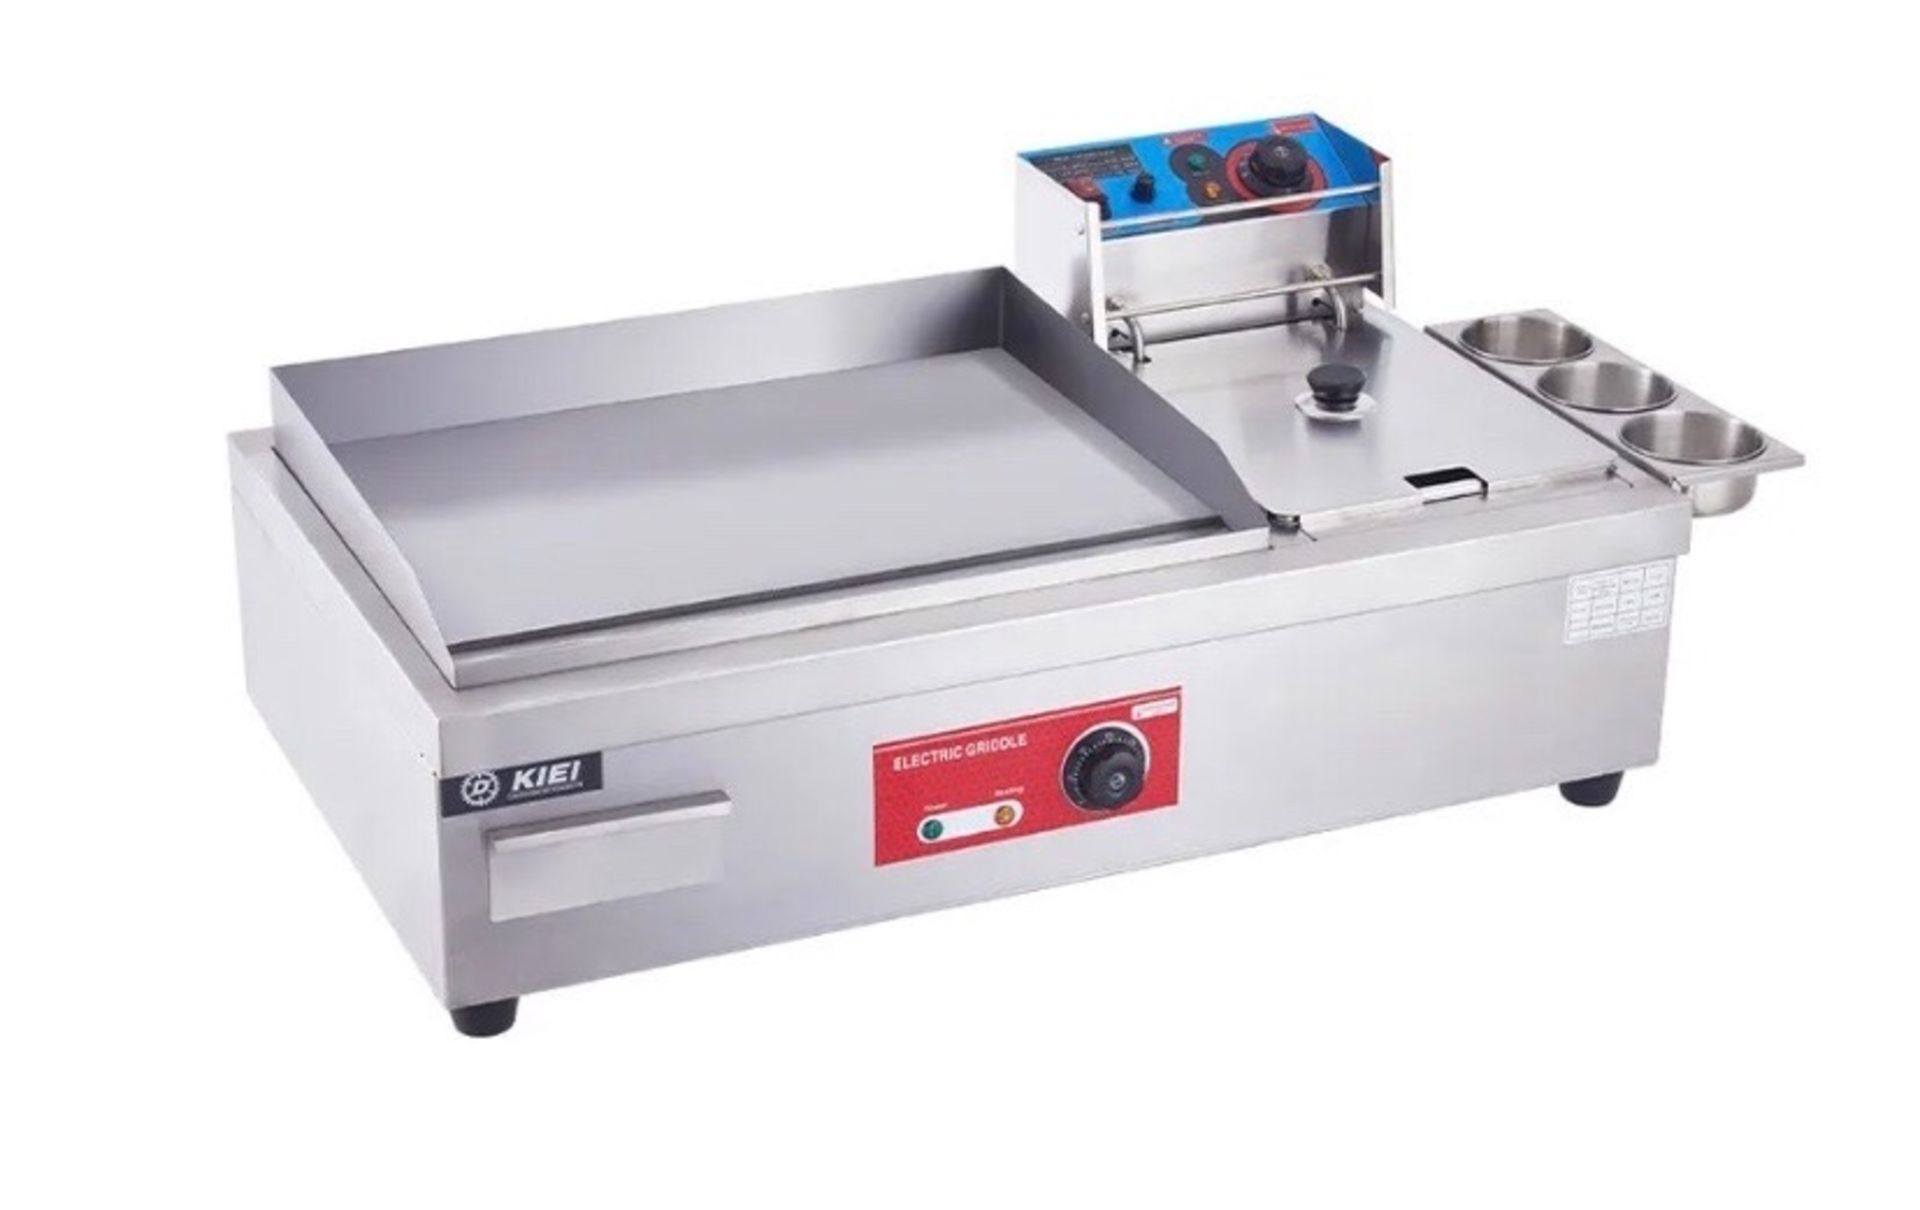 Brand New Electric Griddle Countertop & Deep Fryer 2 In 1 - Image 2 of 2